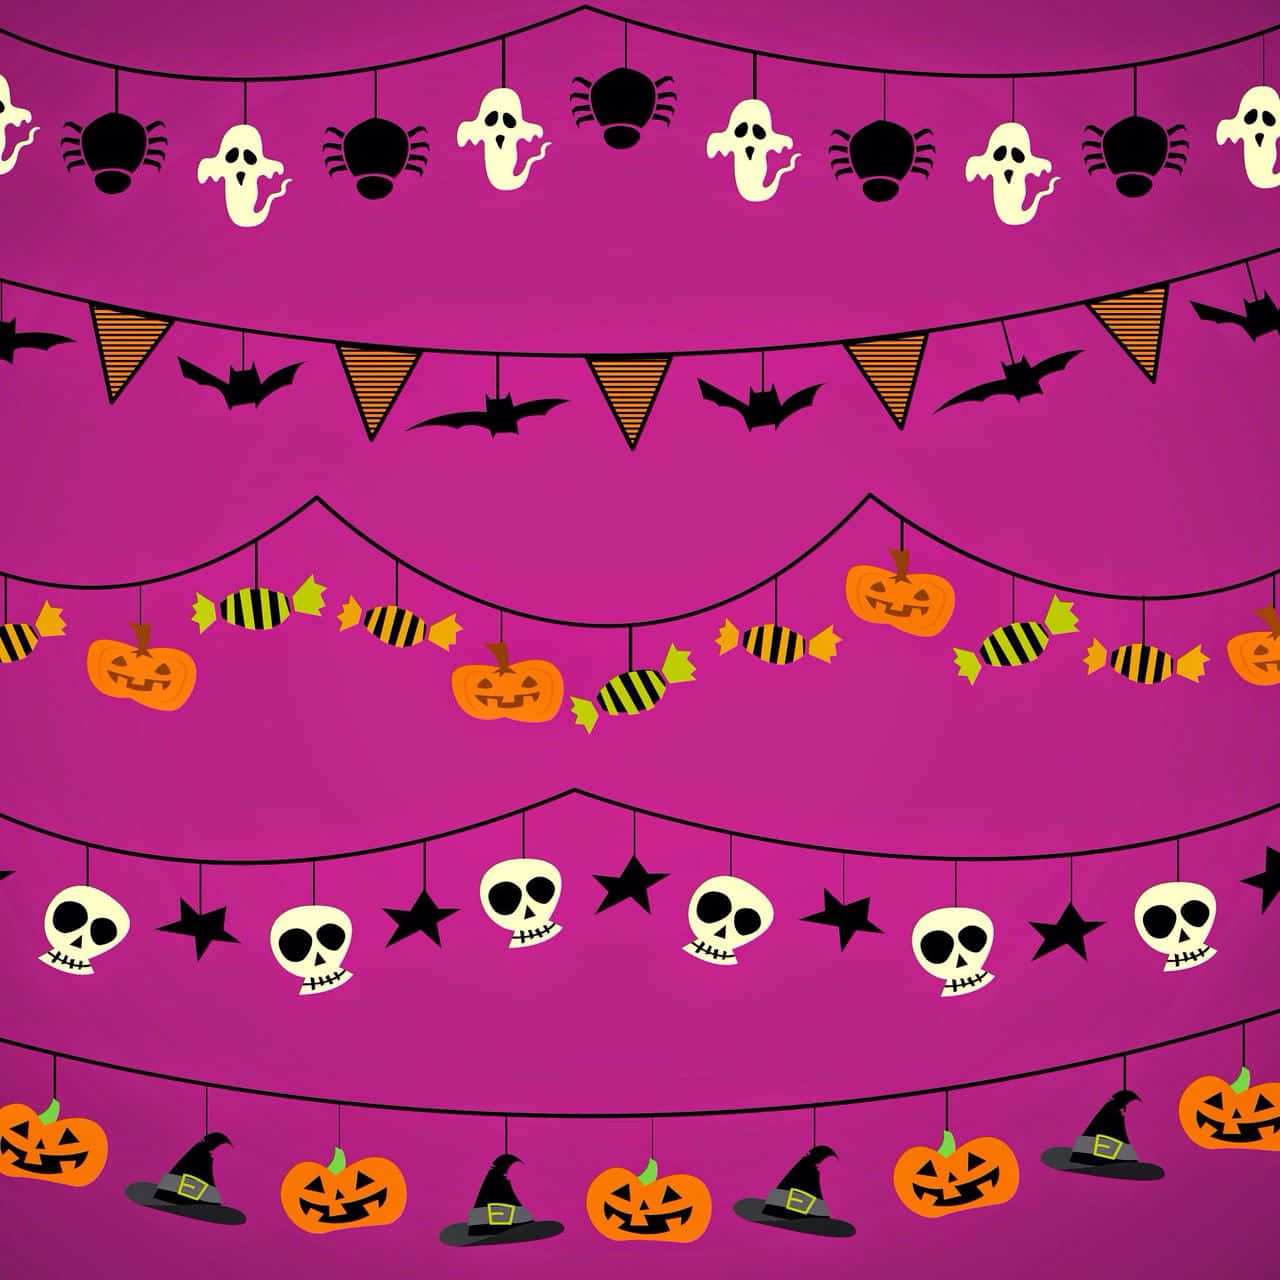 Celebrate in style with a festive Pink Halloween Wallpaper